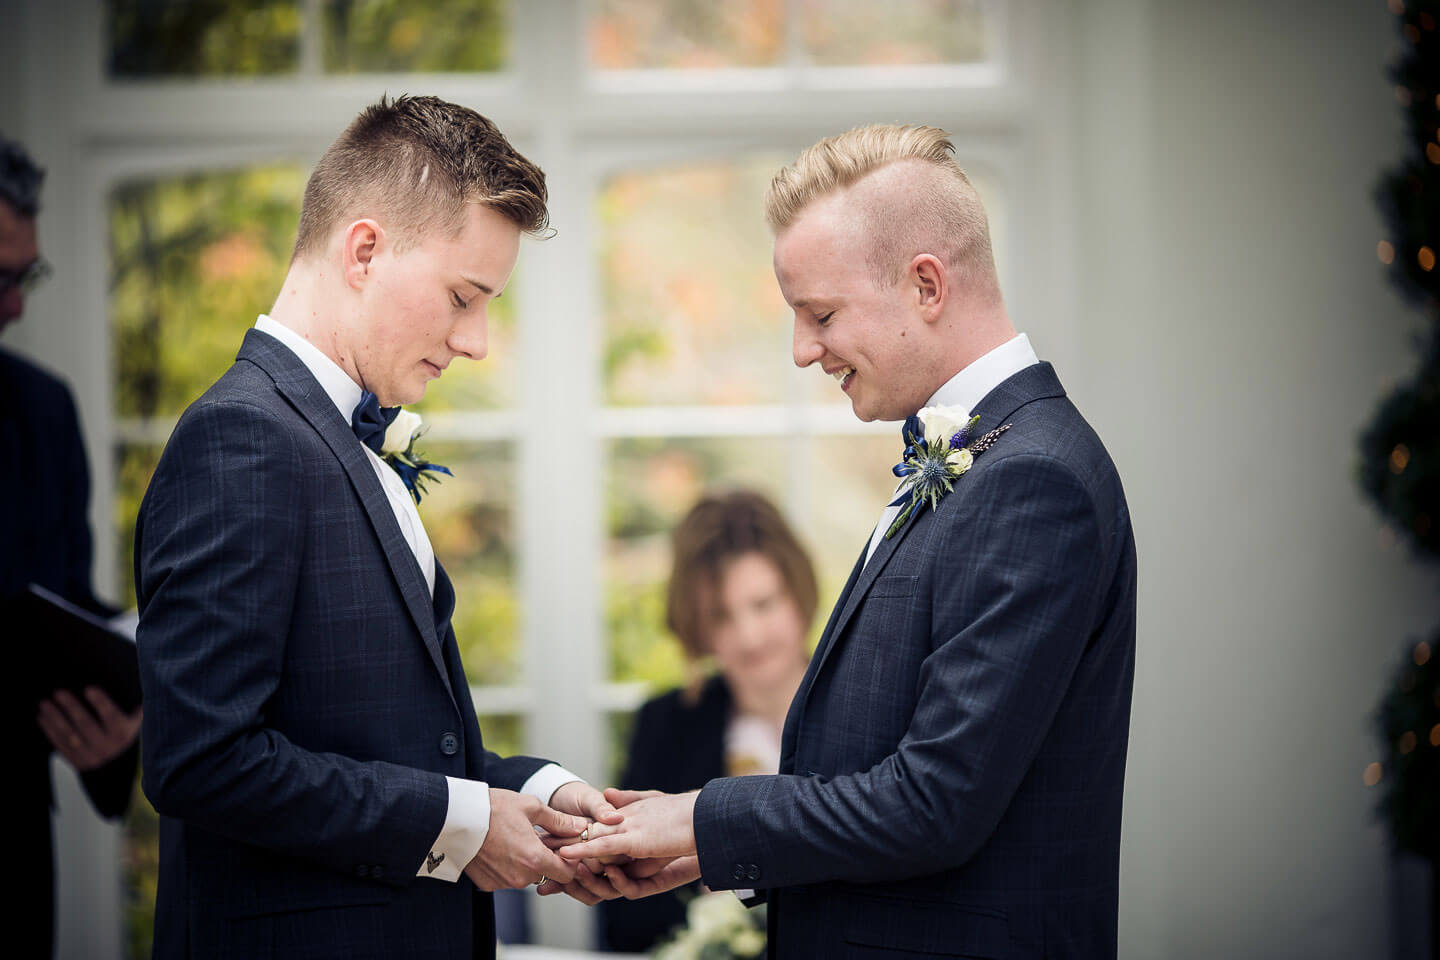 Sam and Kyles gay wedding photos ring exchange image copyright Shooting Pixels featured on The Gay Wedding Guide 3 5